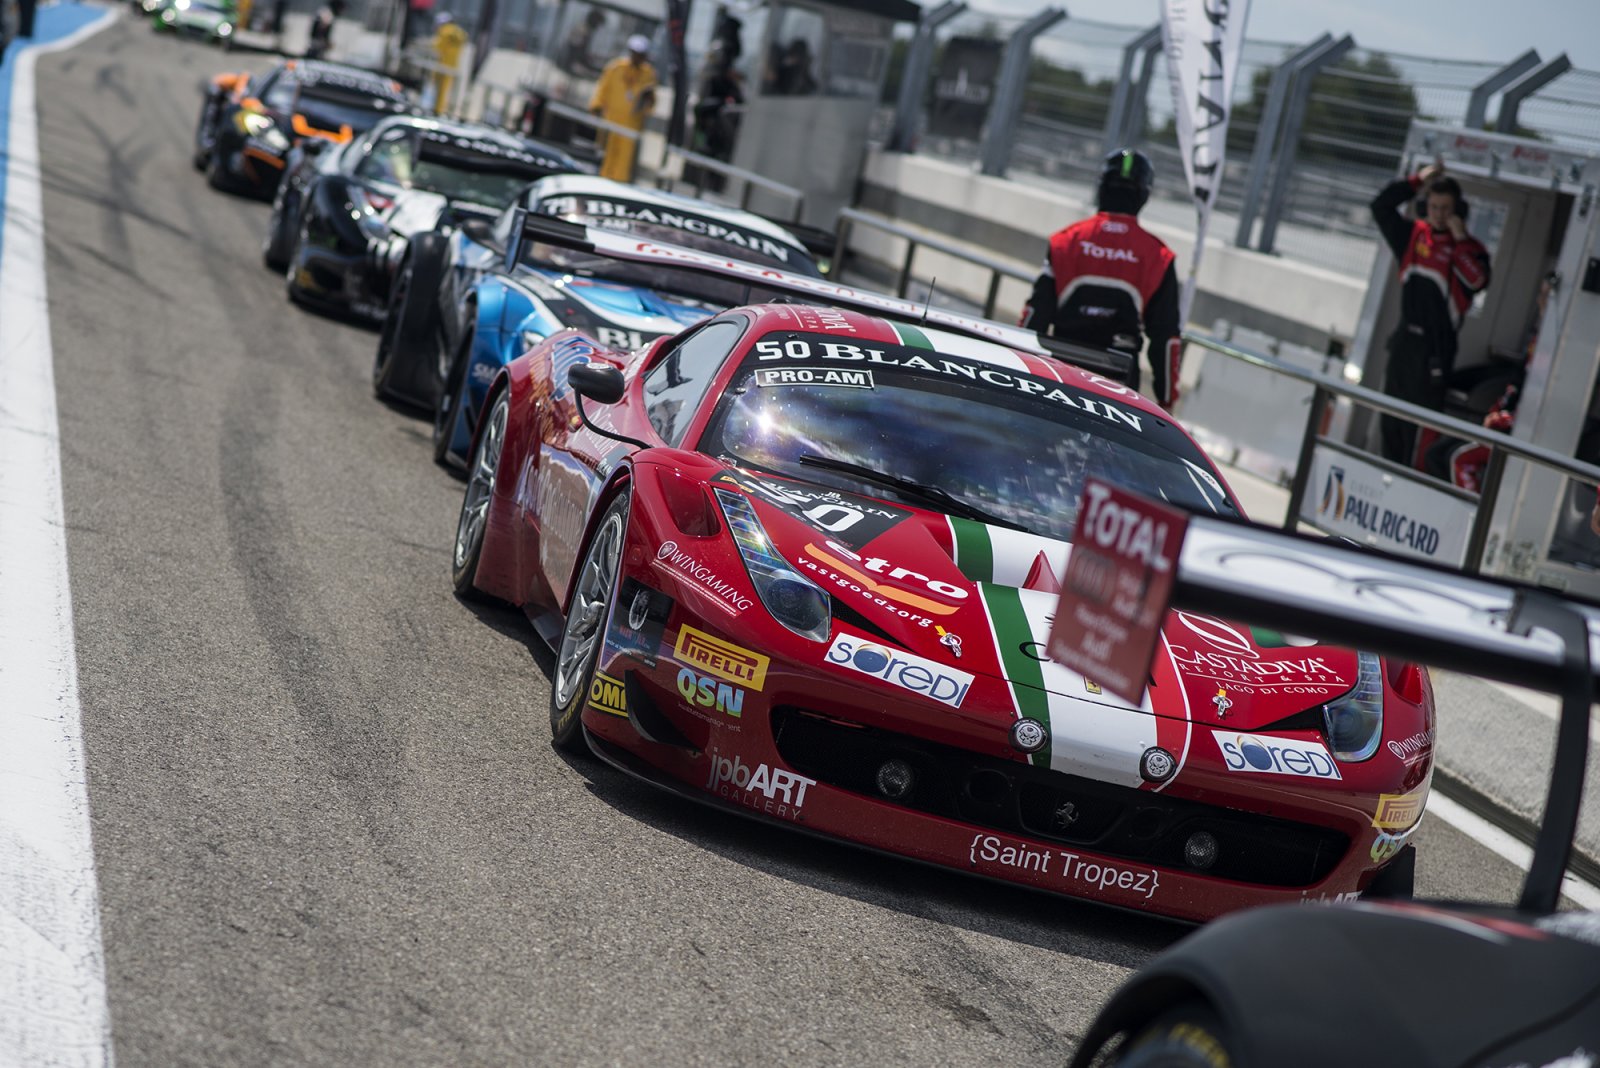 Increased grids for the 2015 Blancpain GT Series